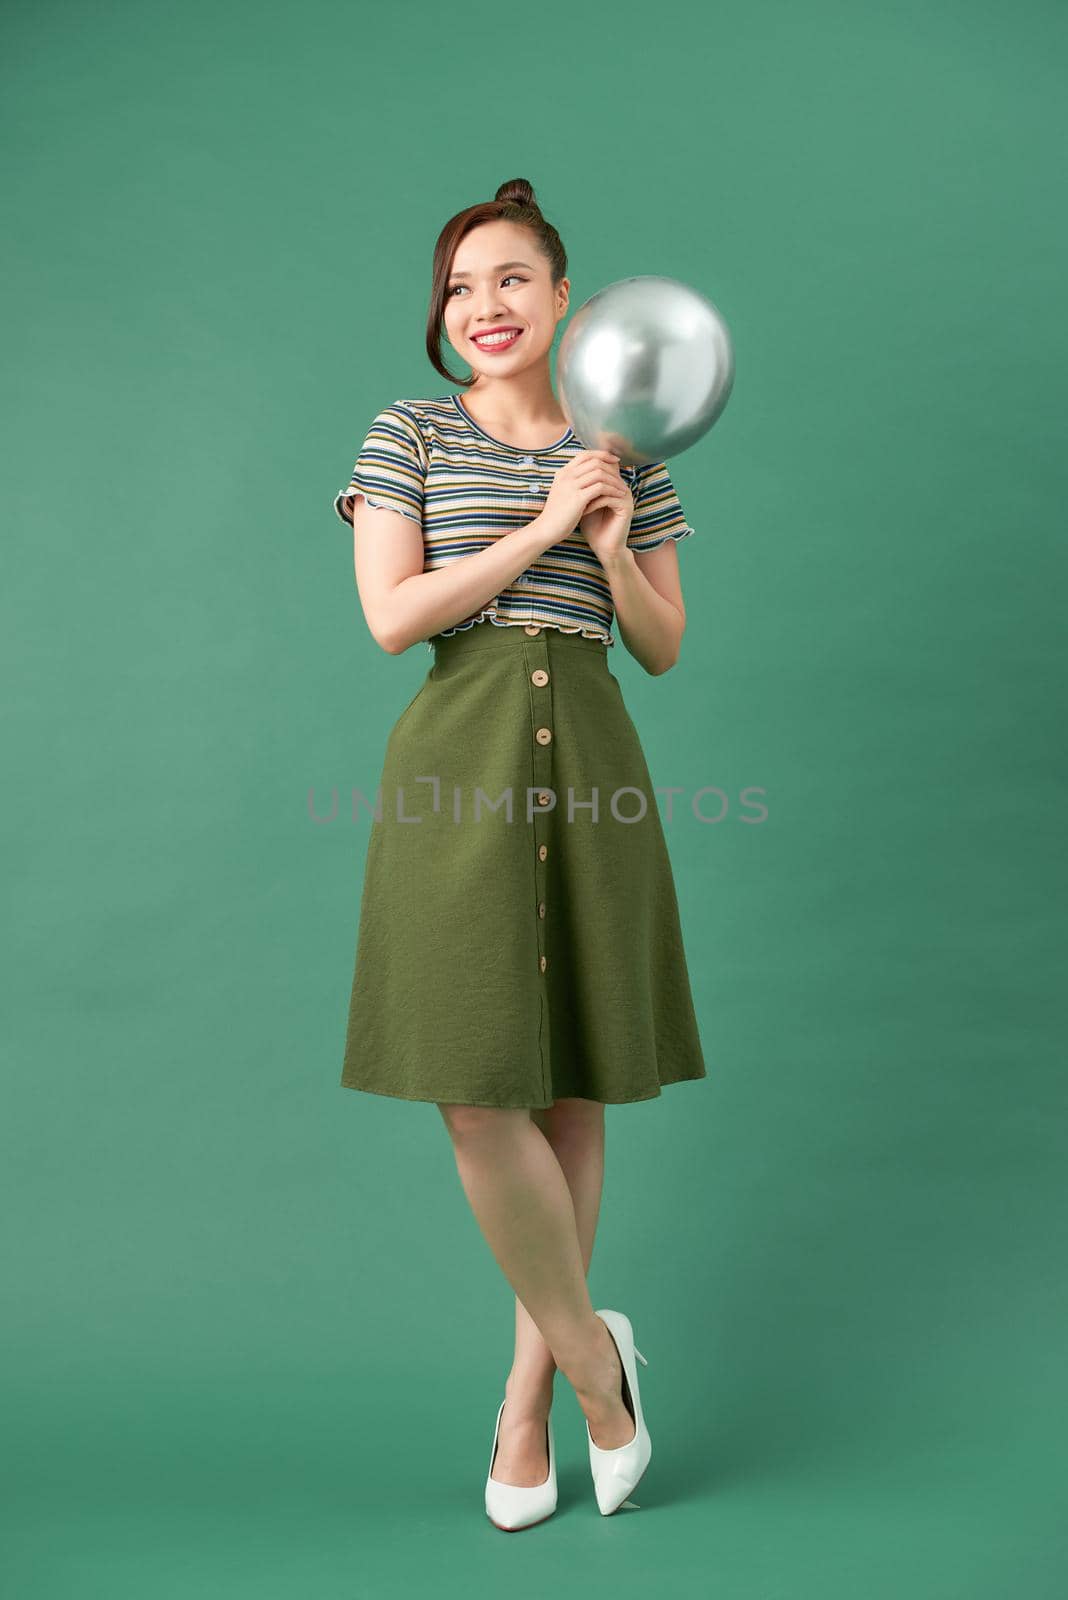 Close up of creativity woman dancing and celebrating on party, holding balloons by hands